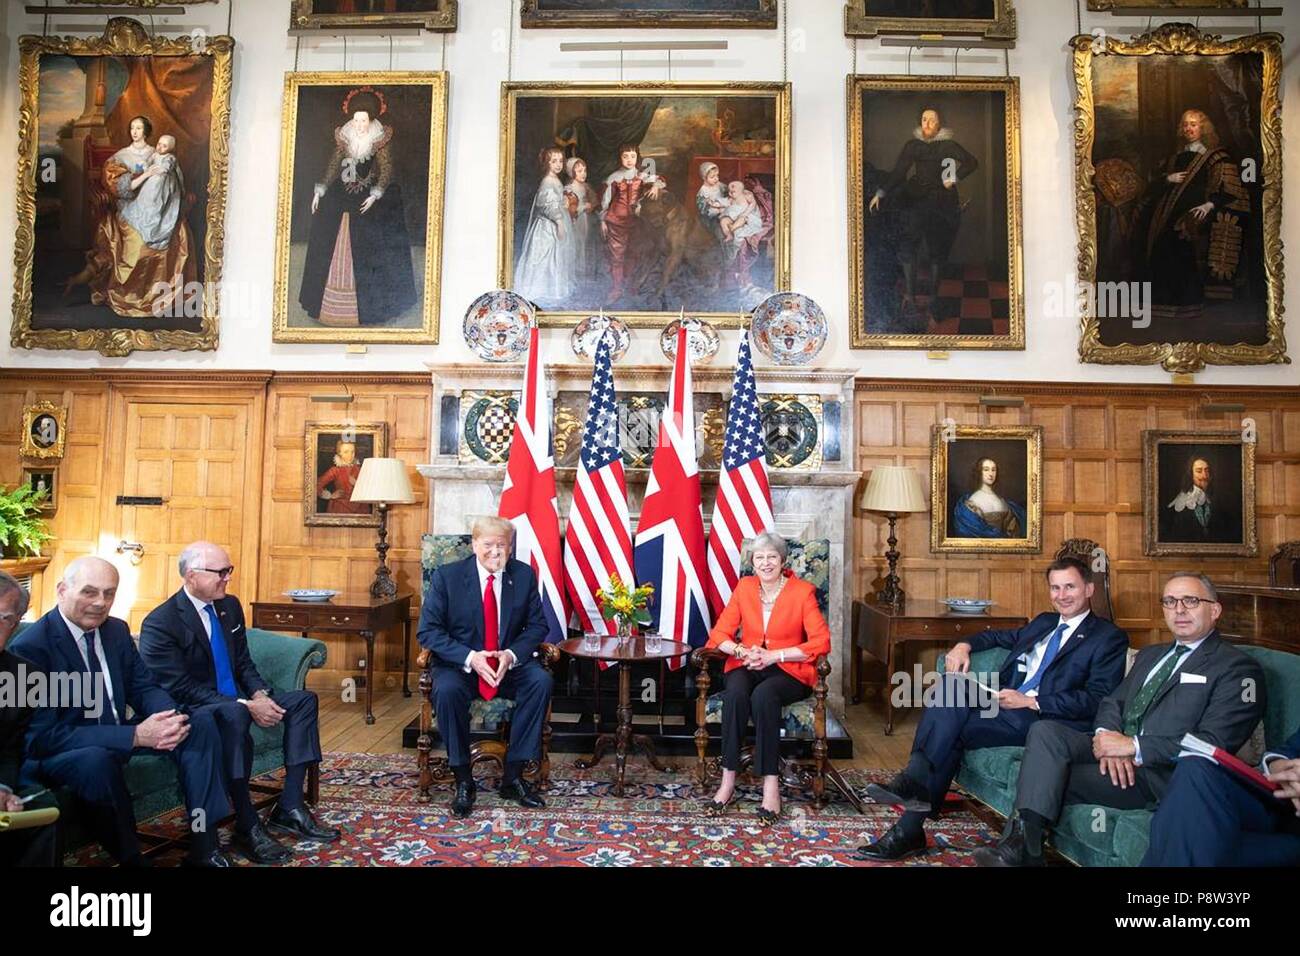 London, UK, 13 July 2018. U.S President Donald Trump and British Prime Minister Theresa May during bilateral talks at Chequers July 12, 2018 in Buckinghamshire, England. Chequers is the country residence of the Prime Minister. Credit: Planetpix/Alamy Live News Stock Photo